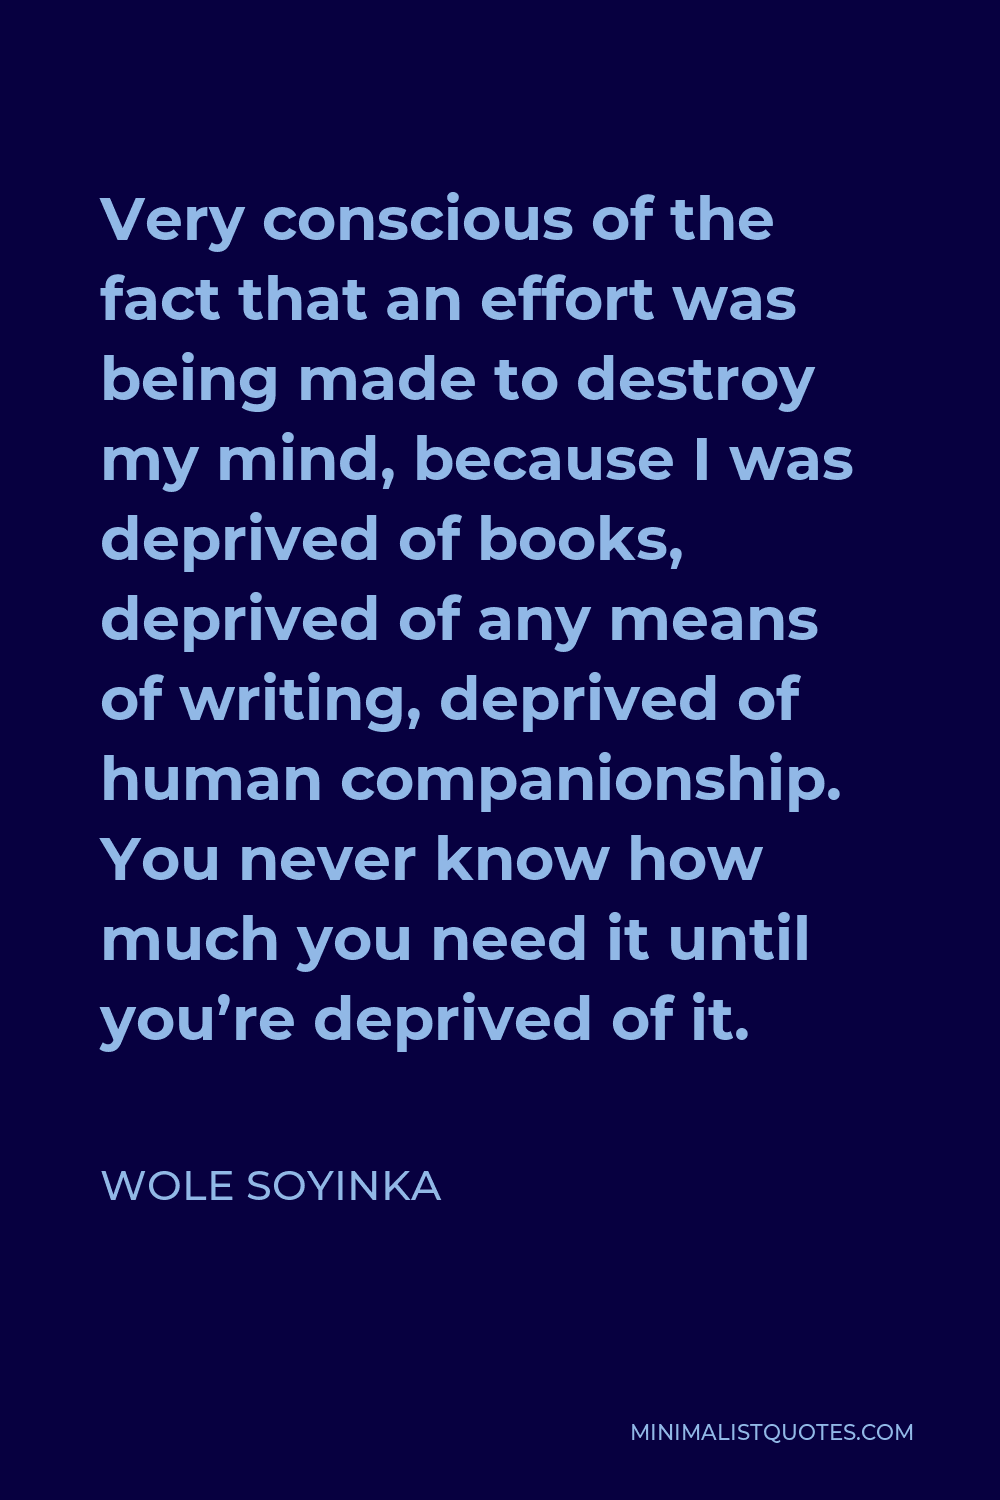 Wole Soyinka Quote - Very conscious of the fact that an effort was being made to destroy my mind, because I was deprived of books, deprived of any means of writing, deprived of human companionship. You never know how much you need it until you’re deprived of it.